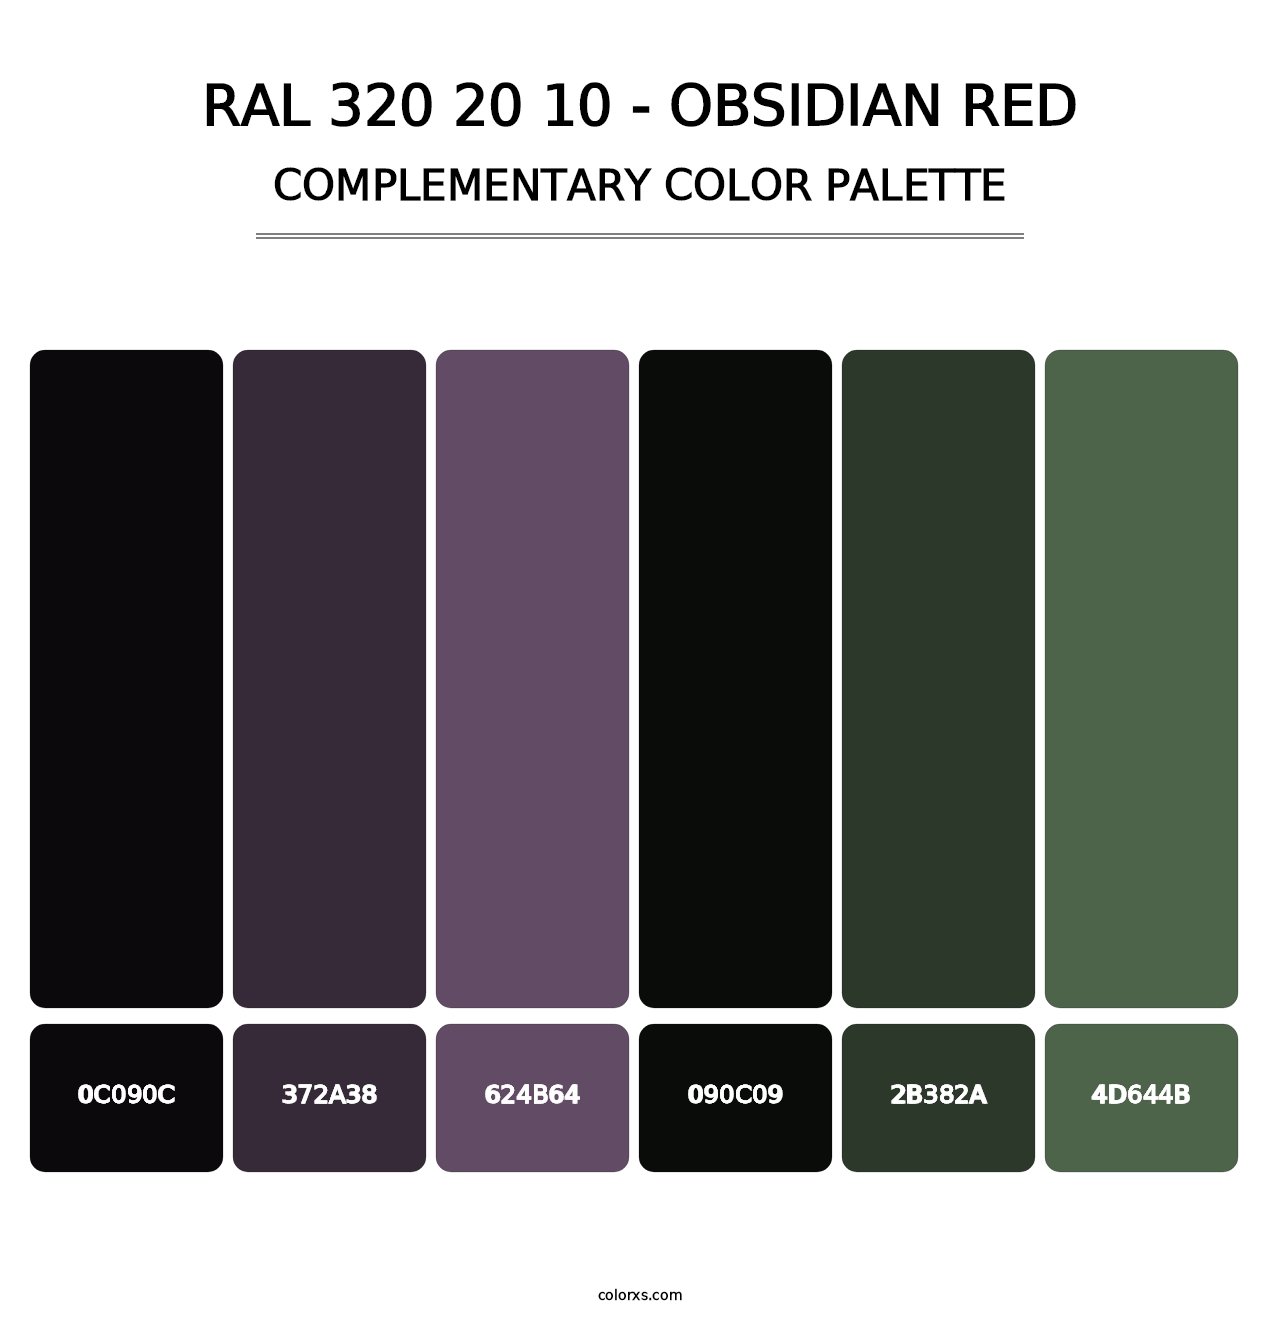 RAL 320 20 10 - Obsidian Red - Complementary Color Palette